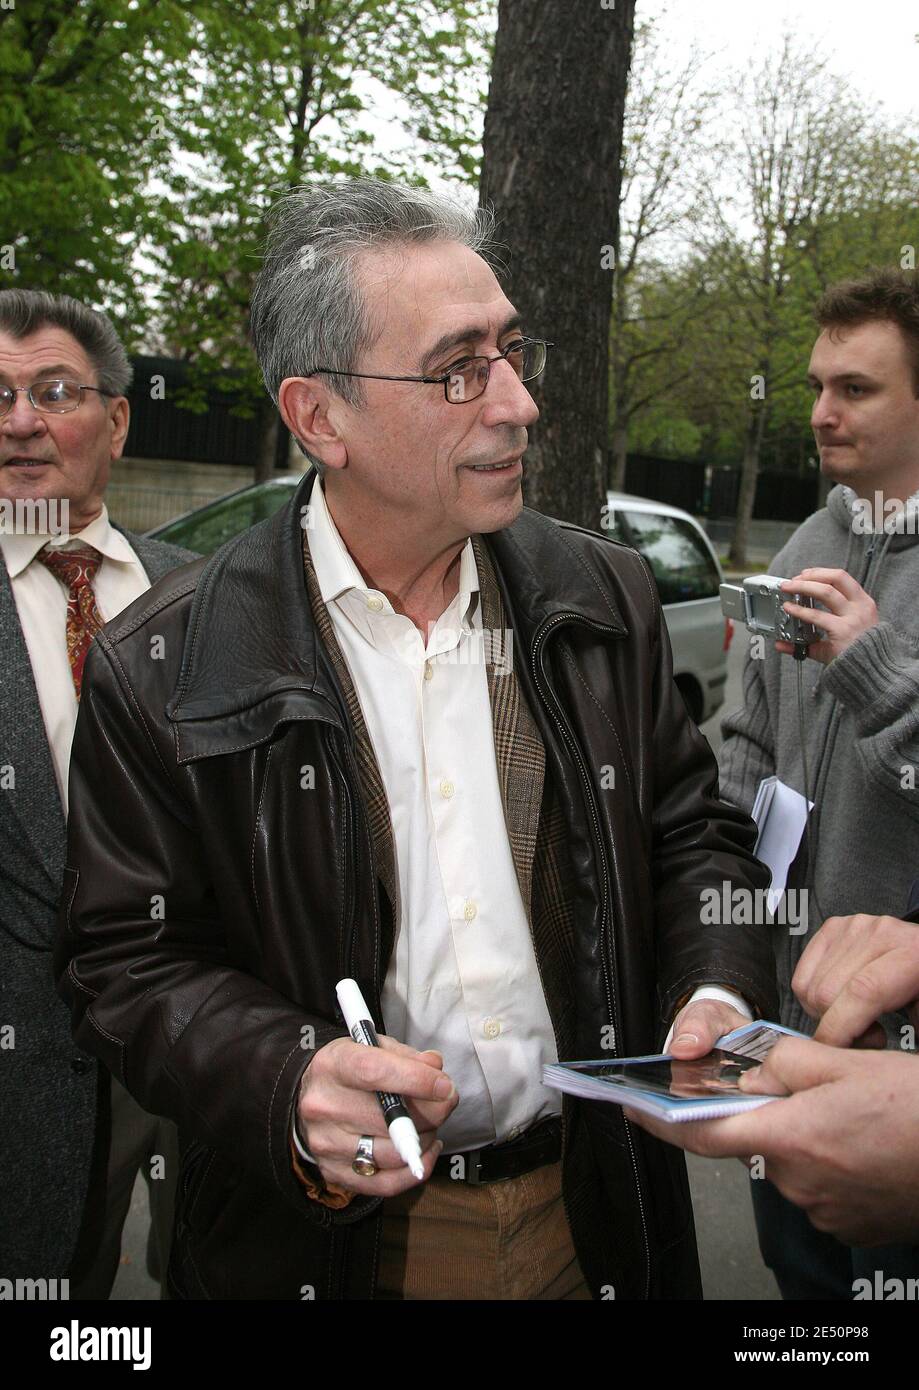 EXCLUSIVE - Actor Luis Rego arrives at the taping of the TV Show Vivement Dimanche held at Studio Gabriel in Paris, France on April 2, 2008. Photo by Denis Guignebourg/ABACAPRESS.COM Stock Photo